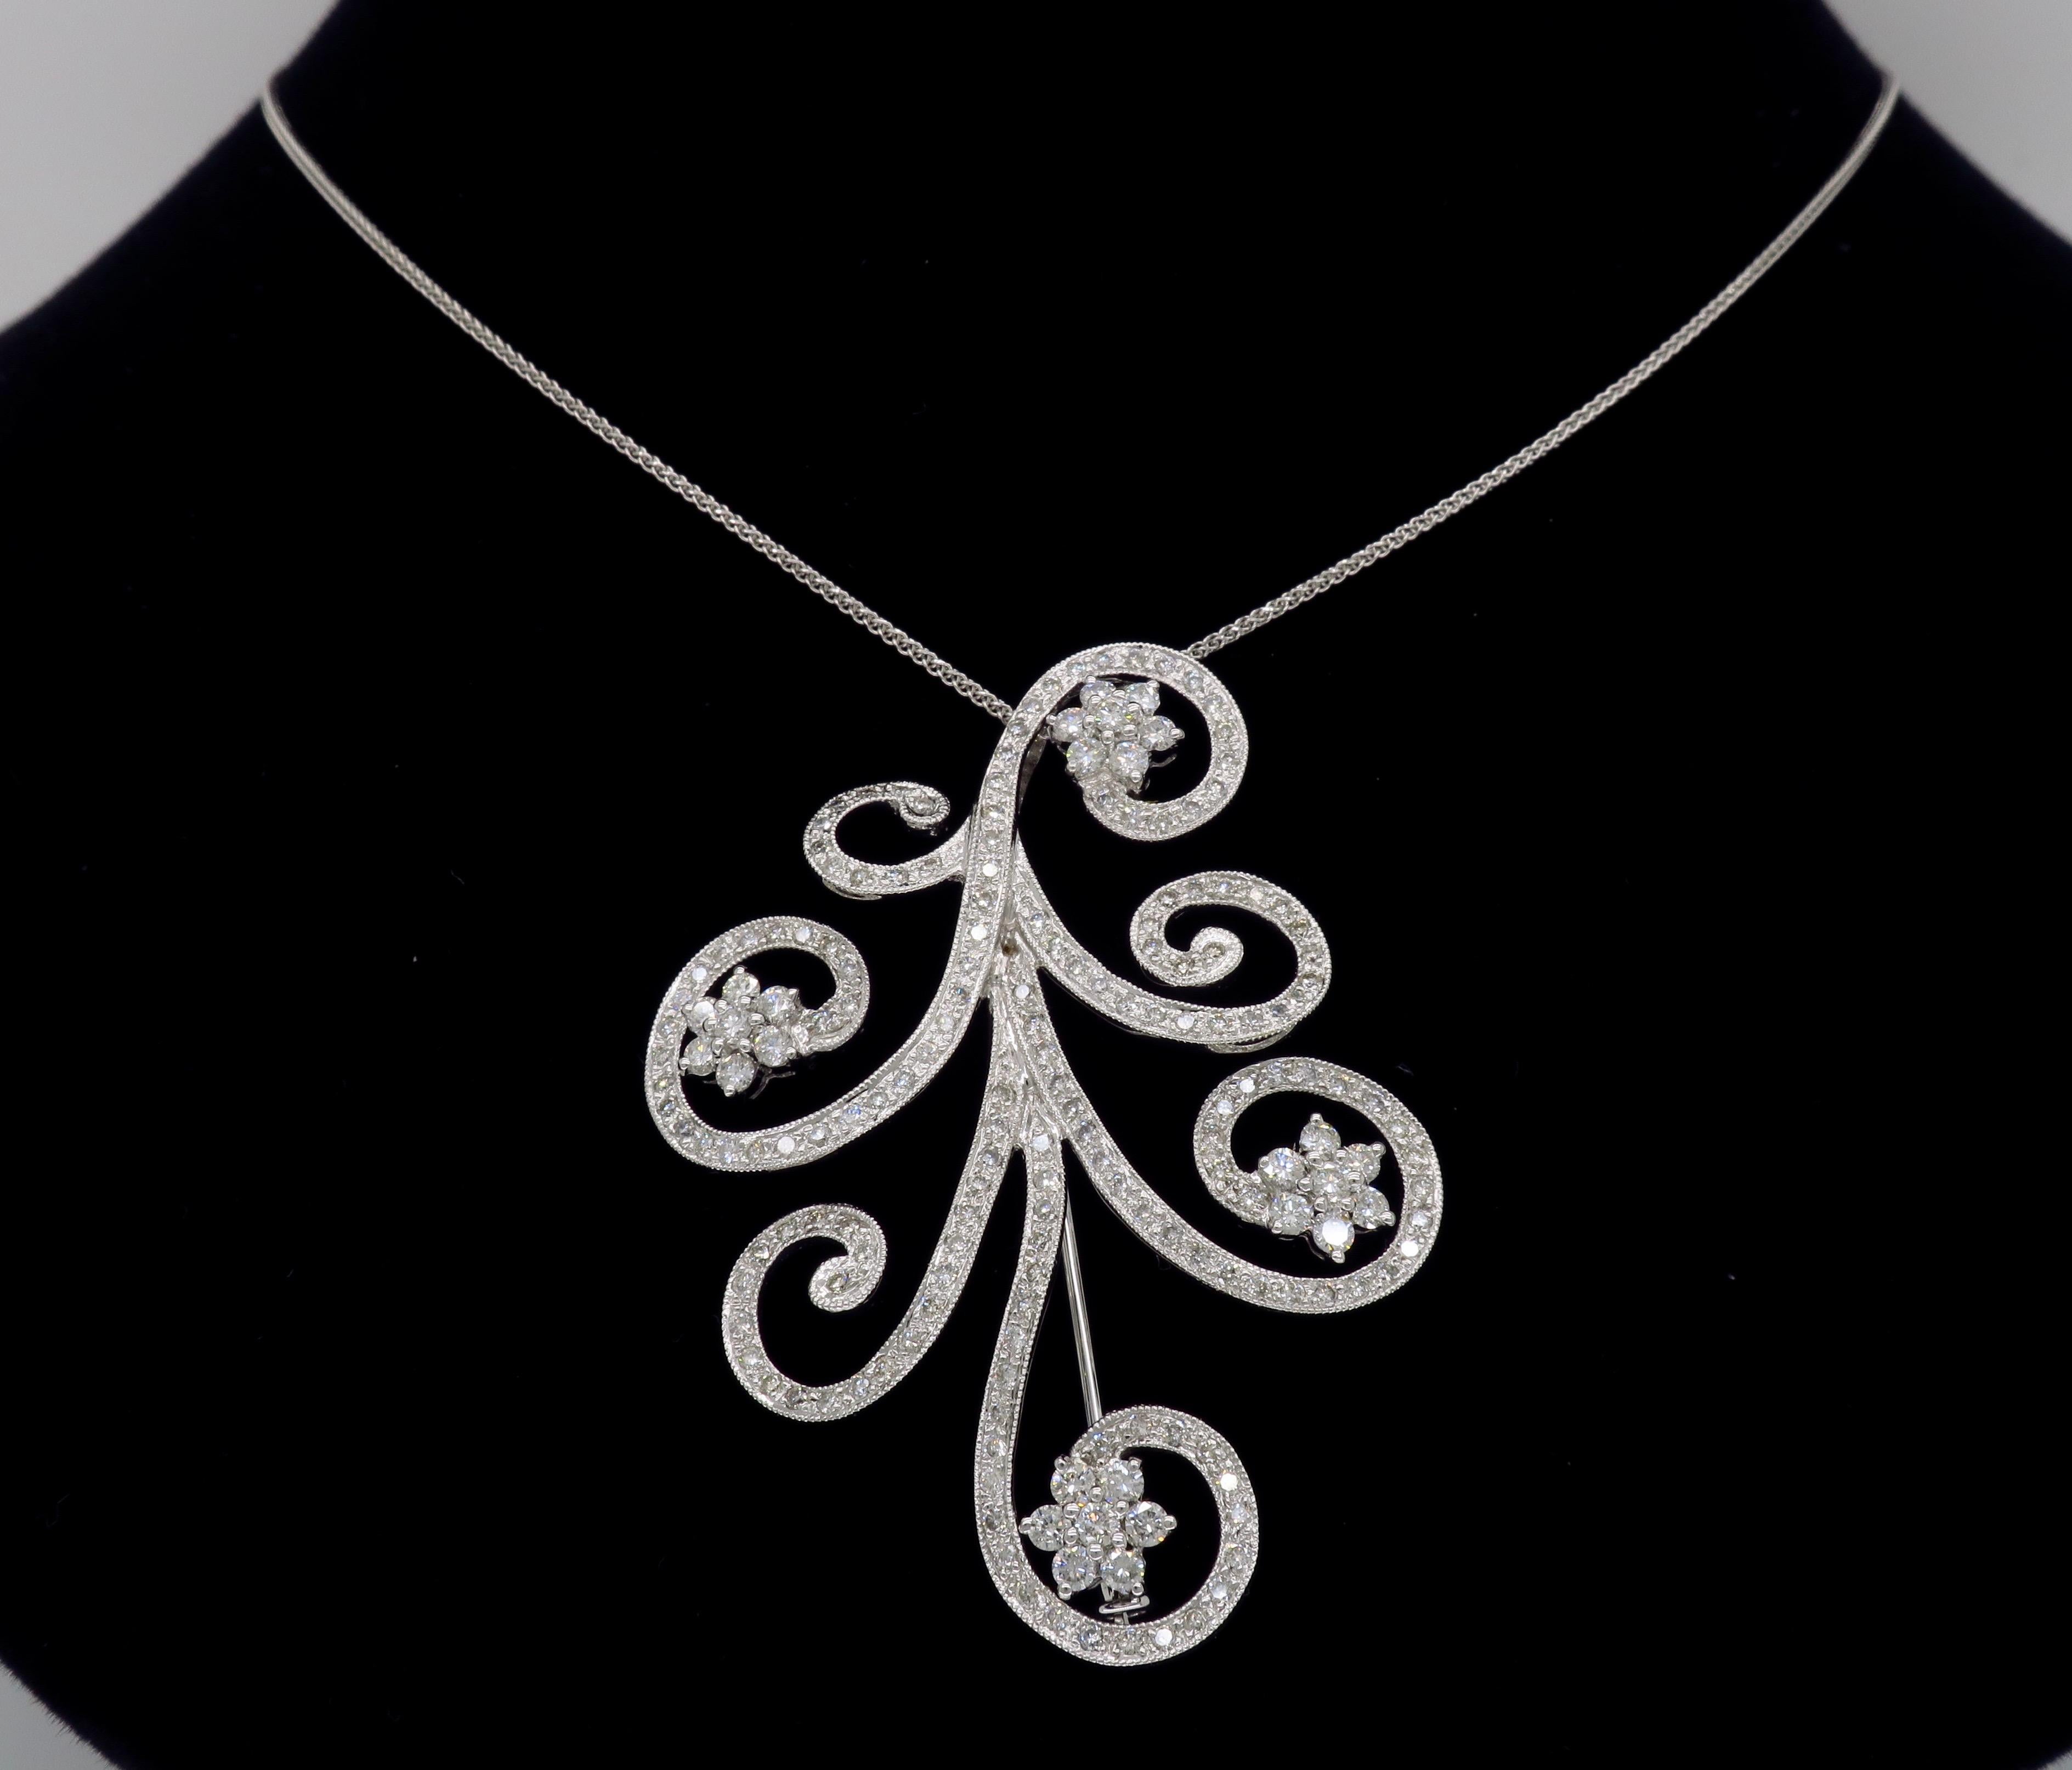 Diamond Floral Brooch and Pendant 6